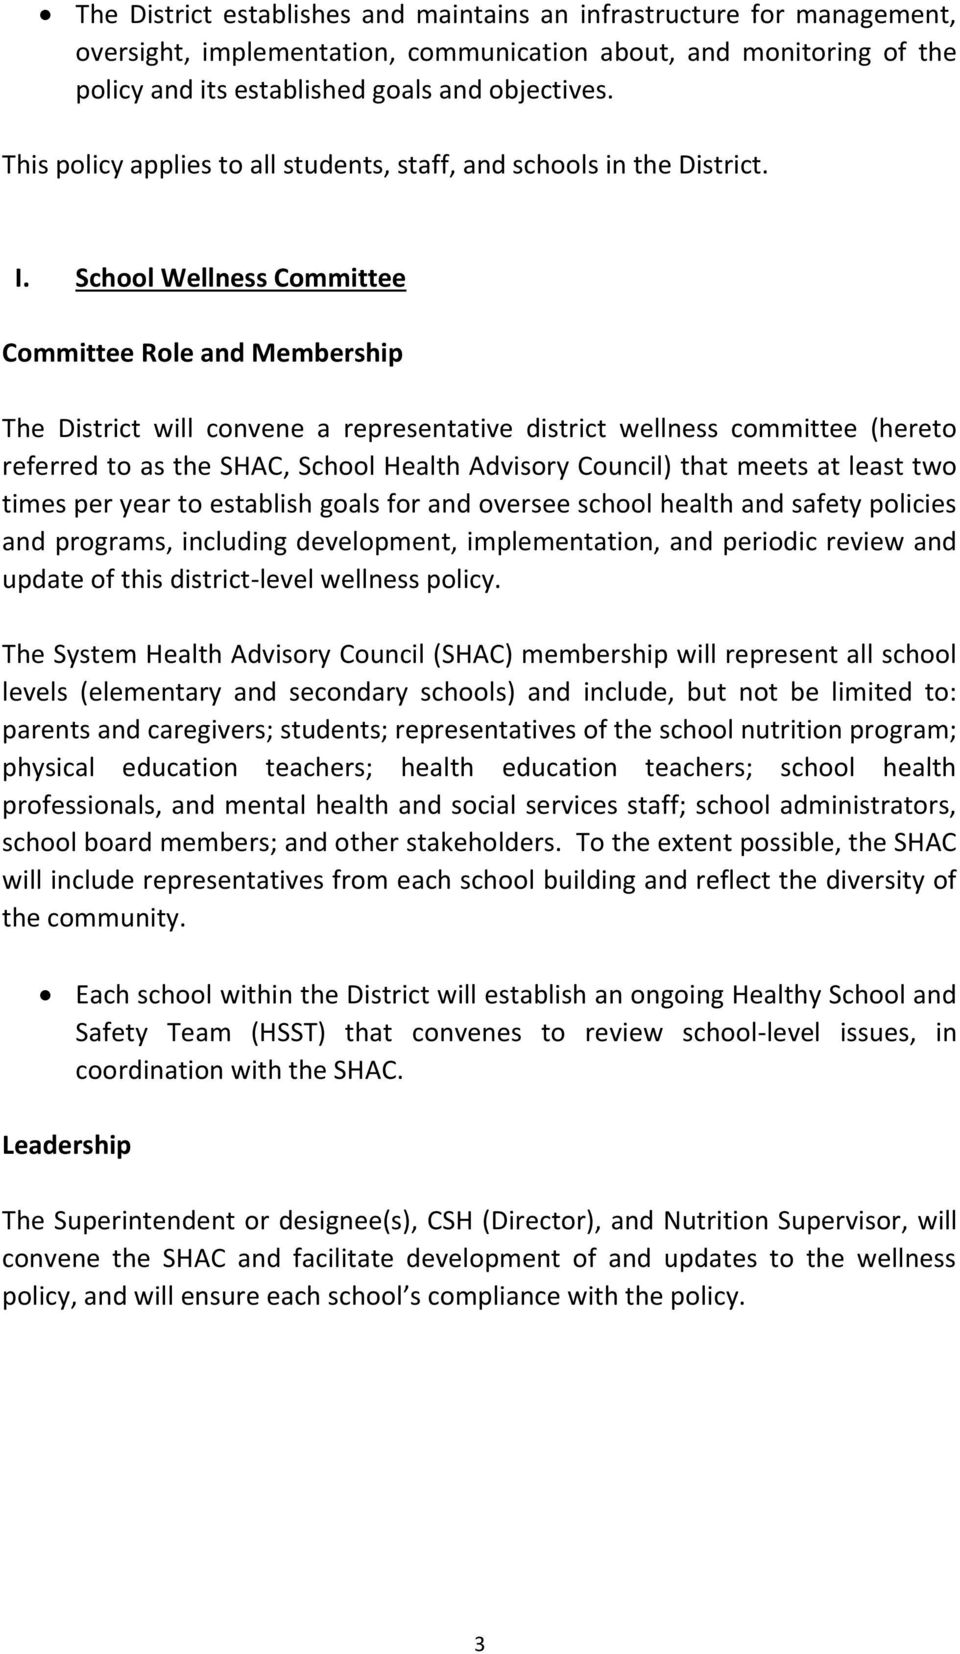 School Wellness Committee Committee Role and Membership The District will convene a representative district wellness committee (hereto referred to as the SHAC, School Health Advisory Council) that